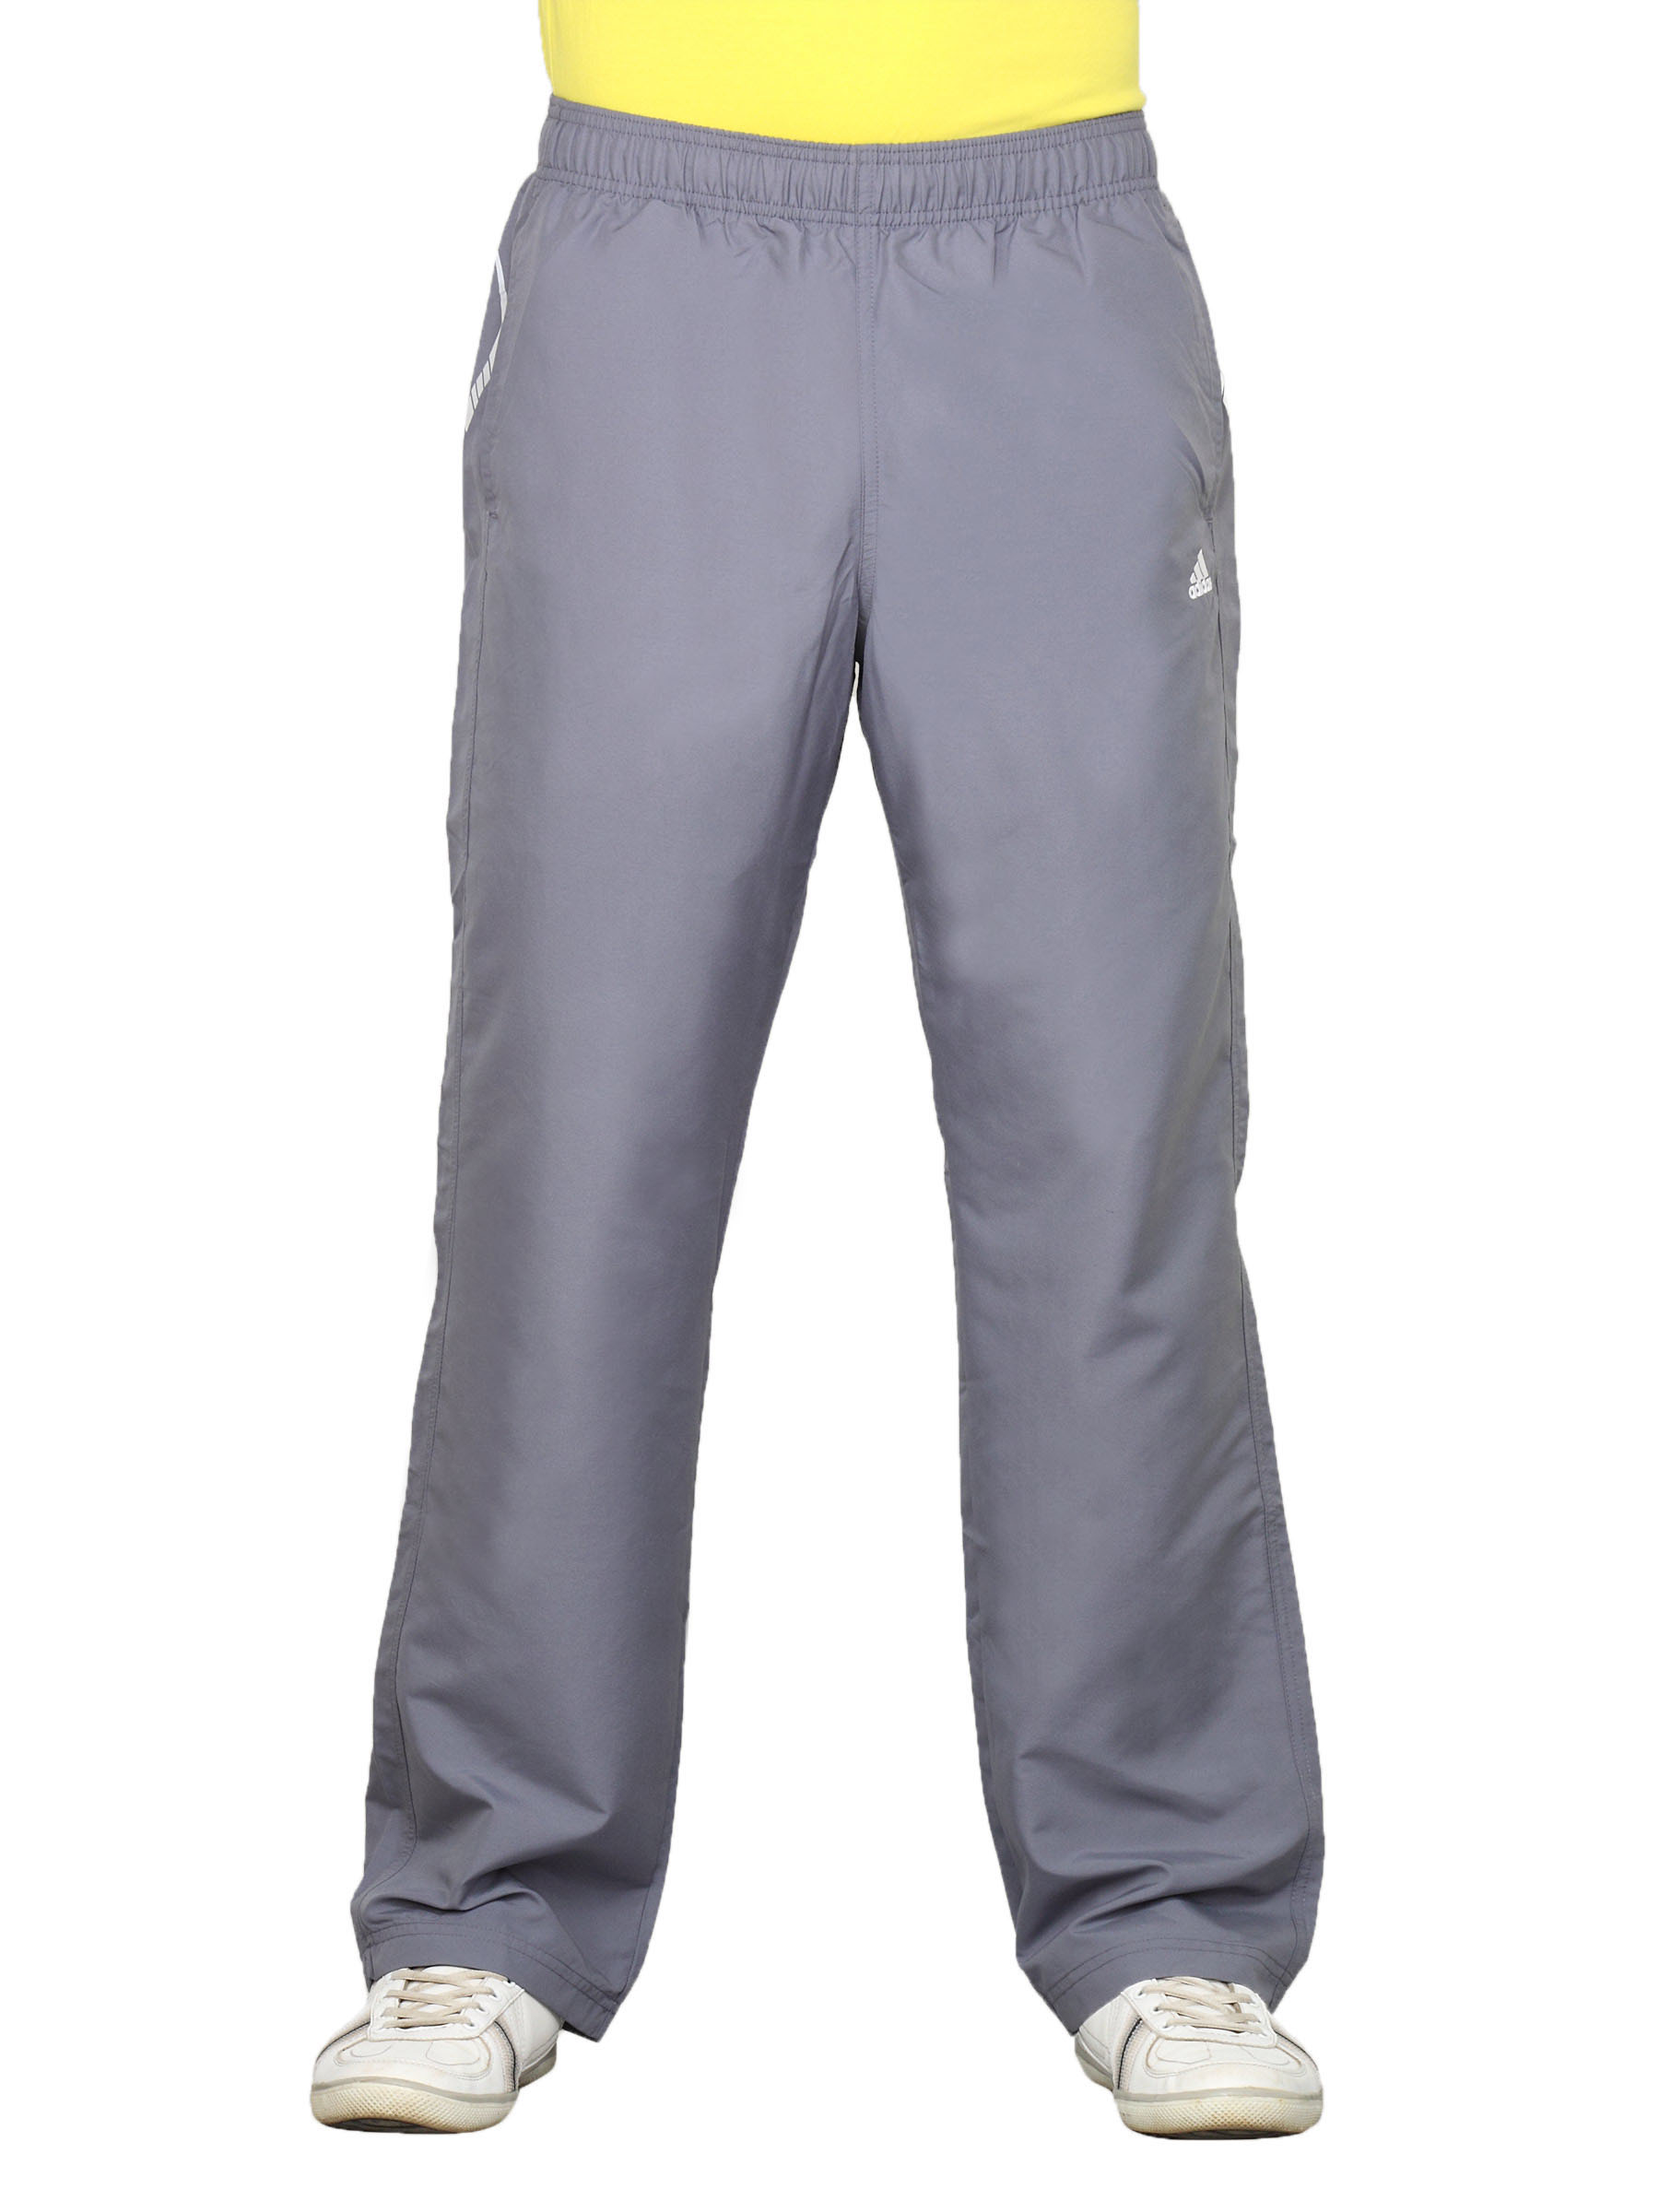 ADIDAS Men's Woven Lead White Track Pant